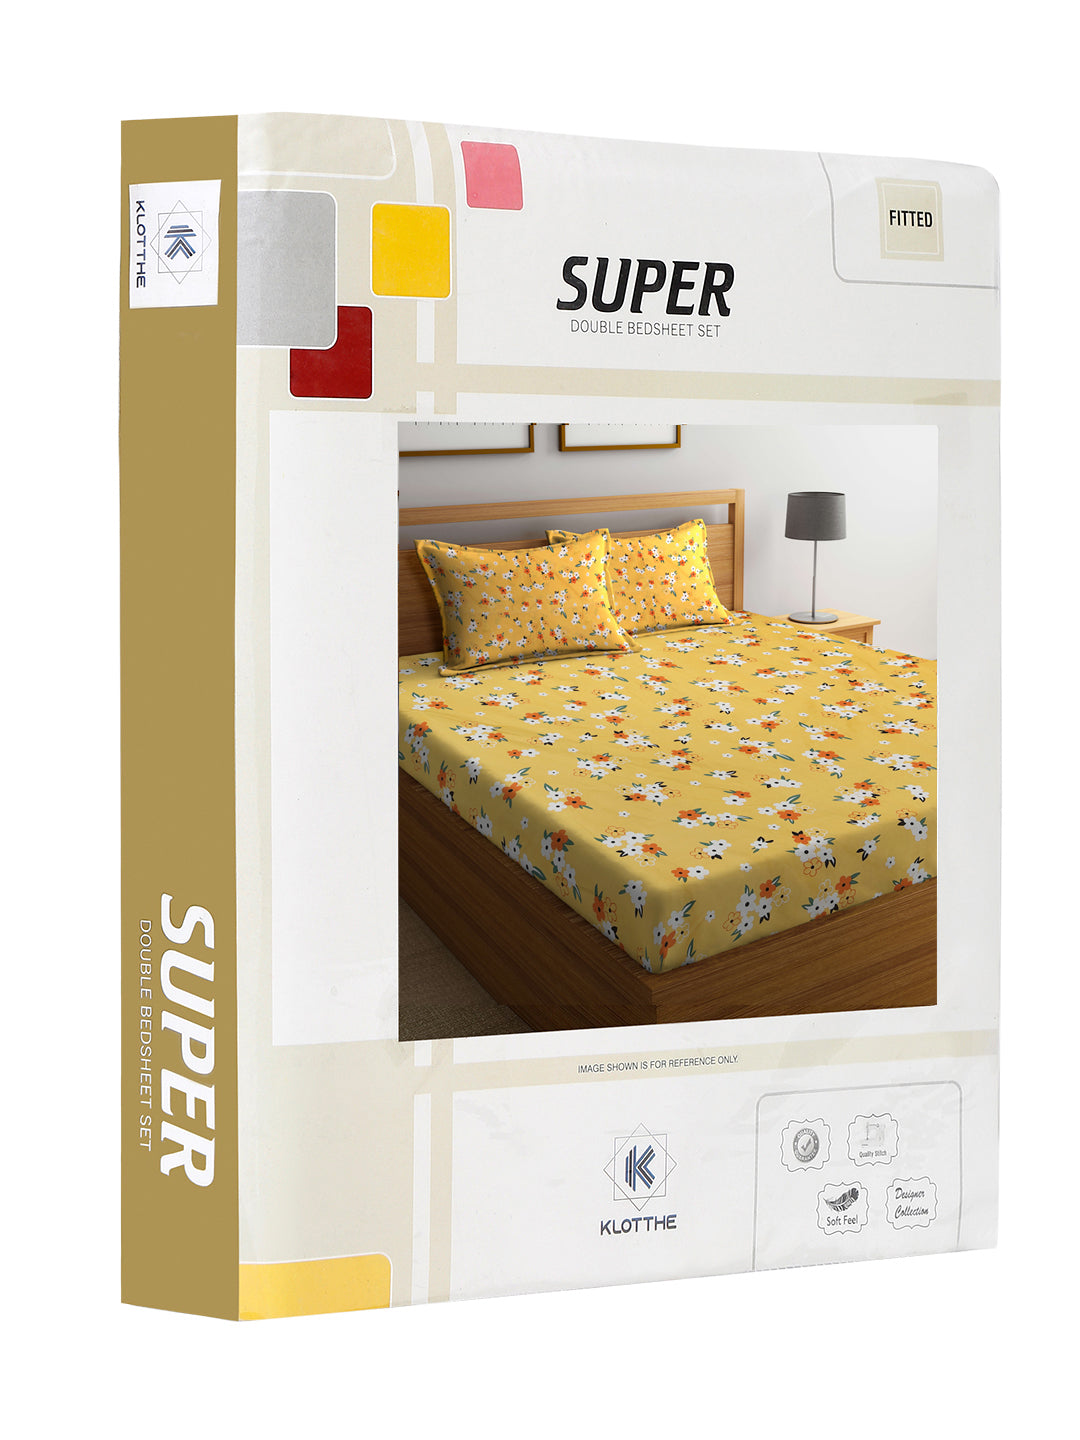 Klotthe Yellow Floral 300 TC Cotton Blend Fitted Double Bedsheet with 2 Pillow Covers in Book Fold Packing